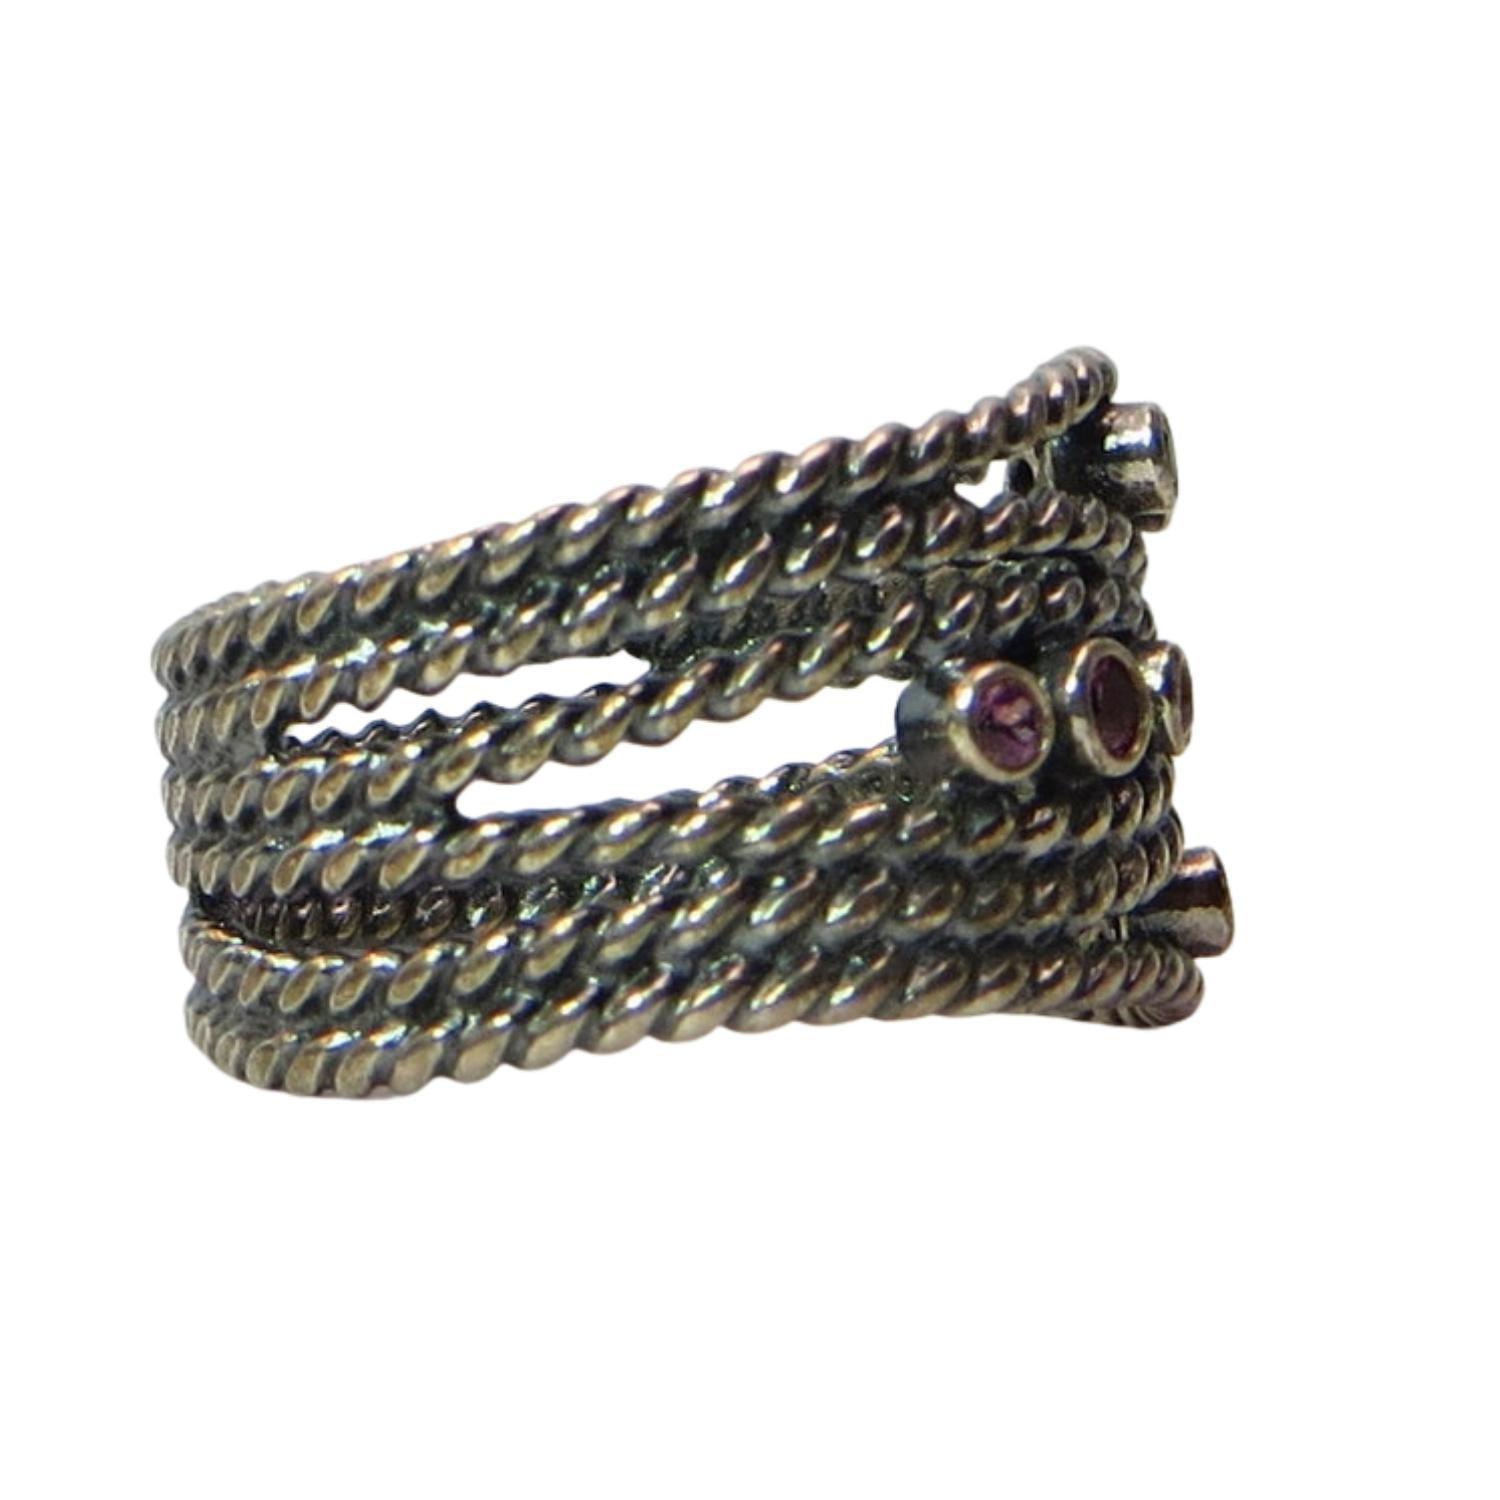 Pandora 190863RHL HIDDEN ROMANCE RHODOLITE Sterling Silver and Rhodolite Stacking Ring.  Ribbed bands of oxidized sterling mesh together and topped with light pink faceted rhodolite stones.